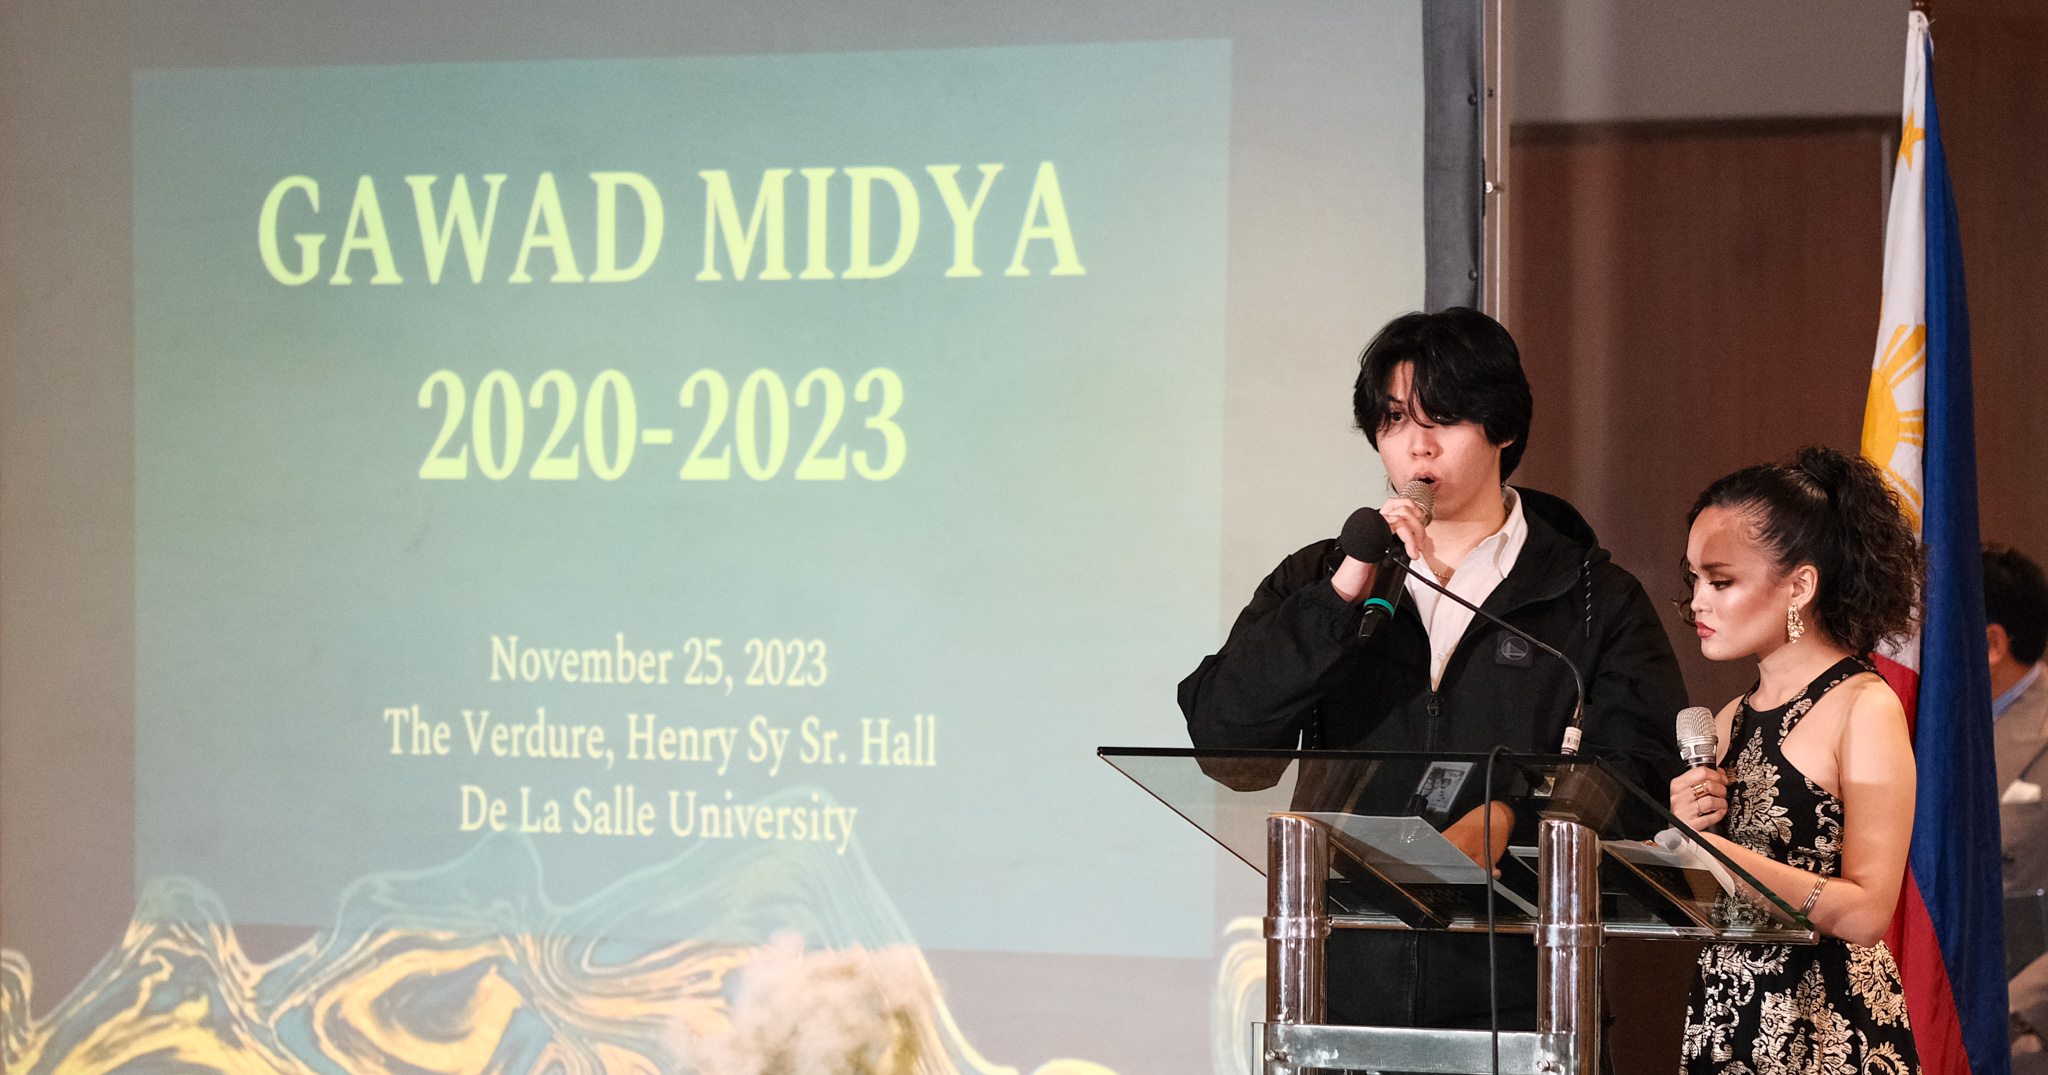 Four years of student media excellence recognized at Gawad Midya 2023